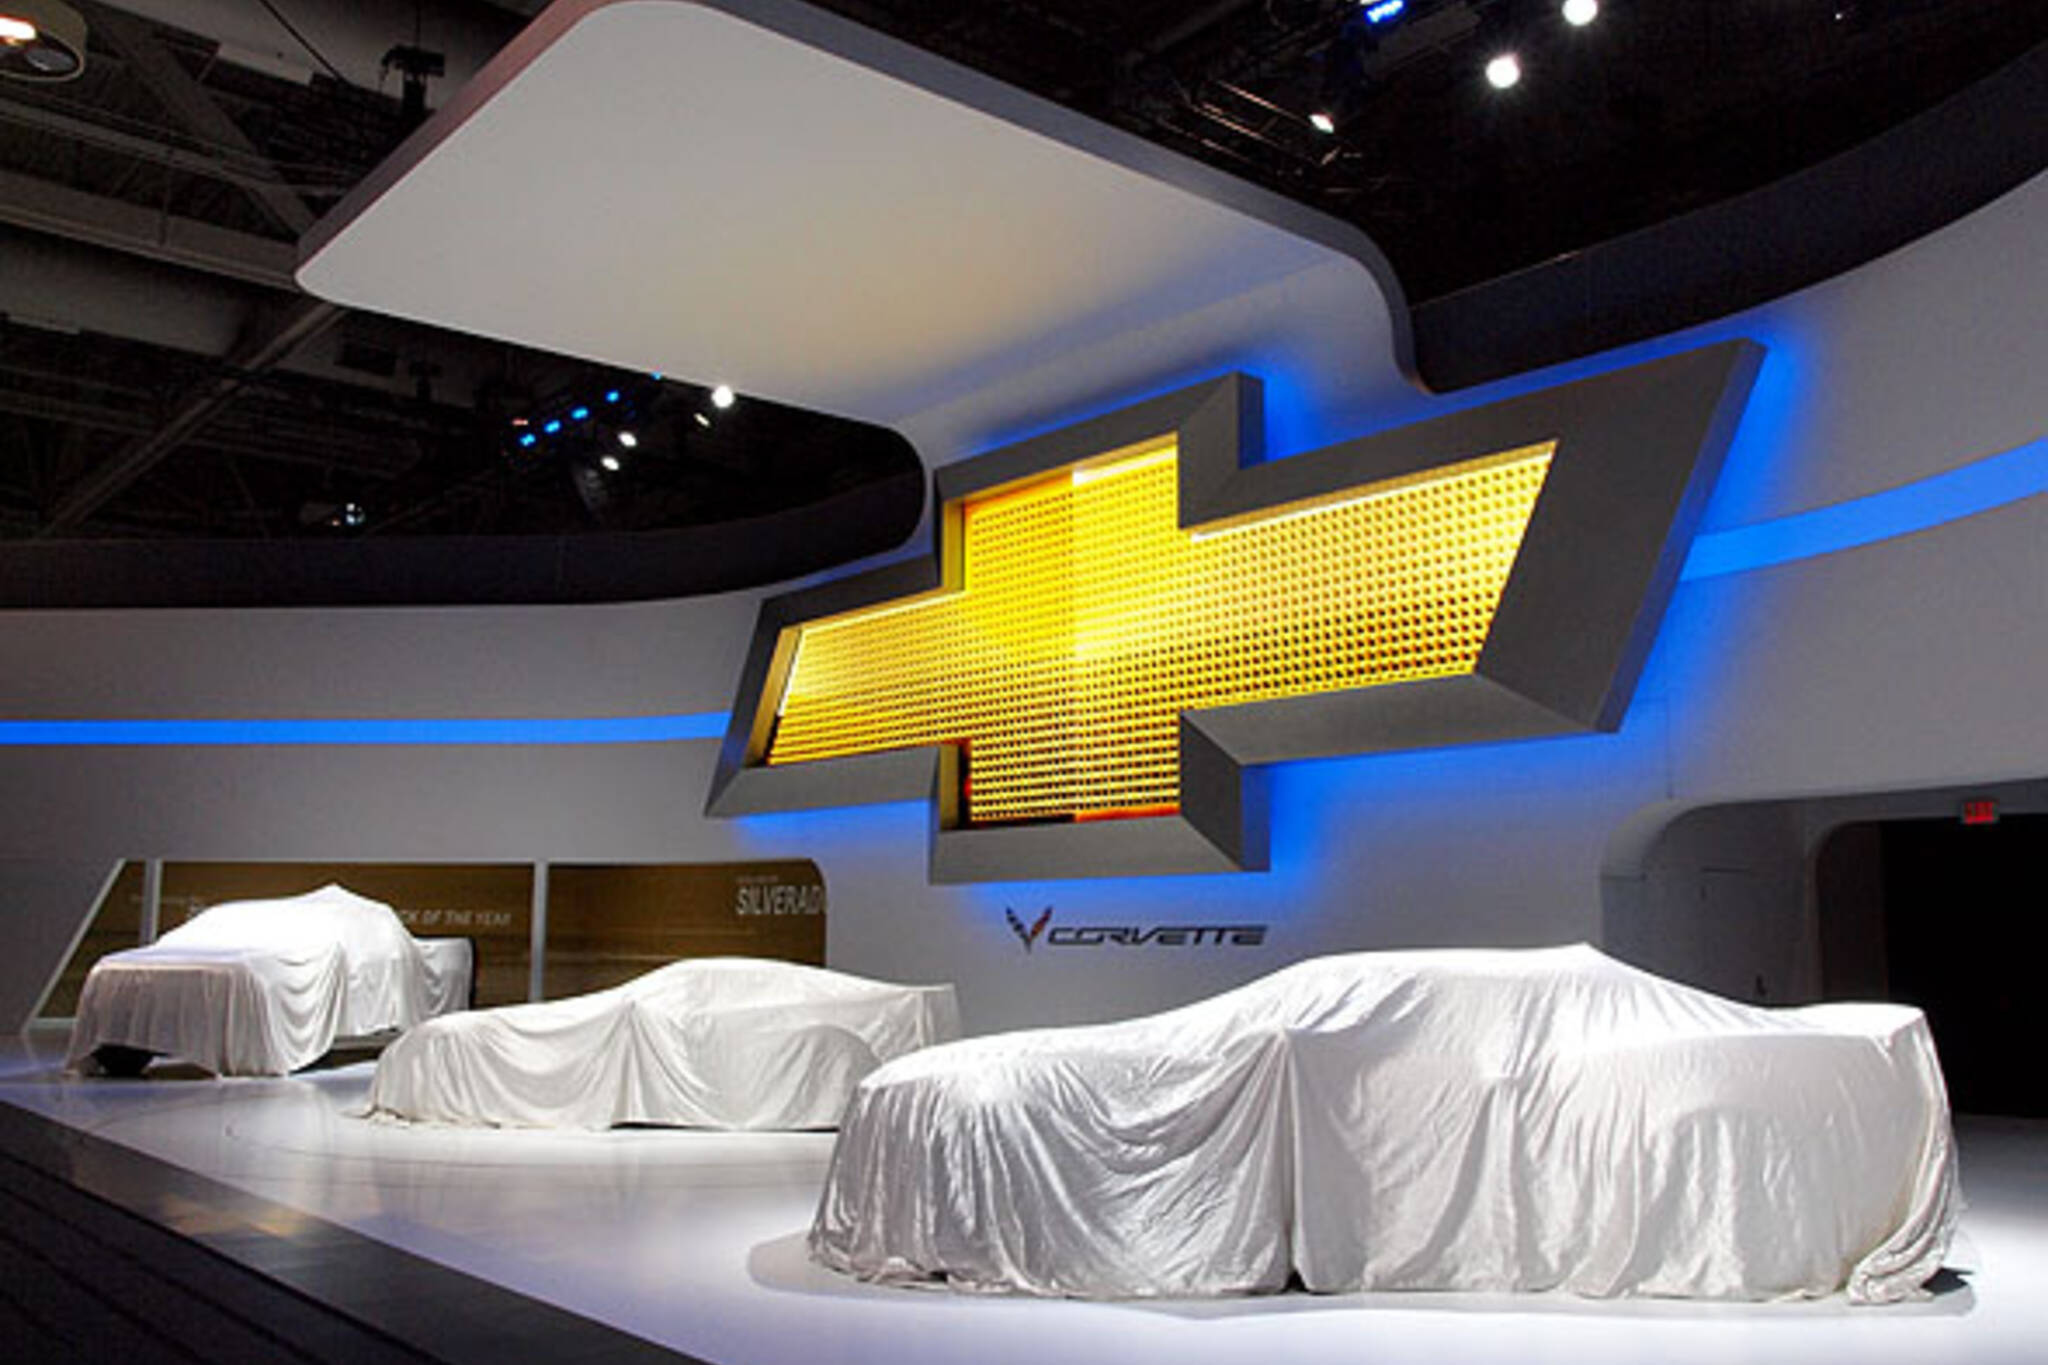 Chevy booth at the 2014 CIAS